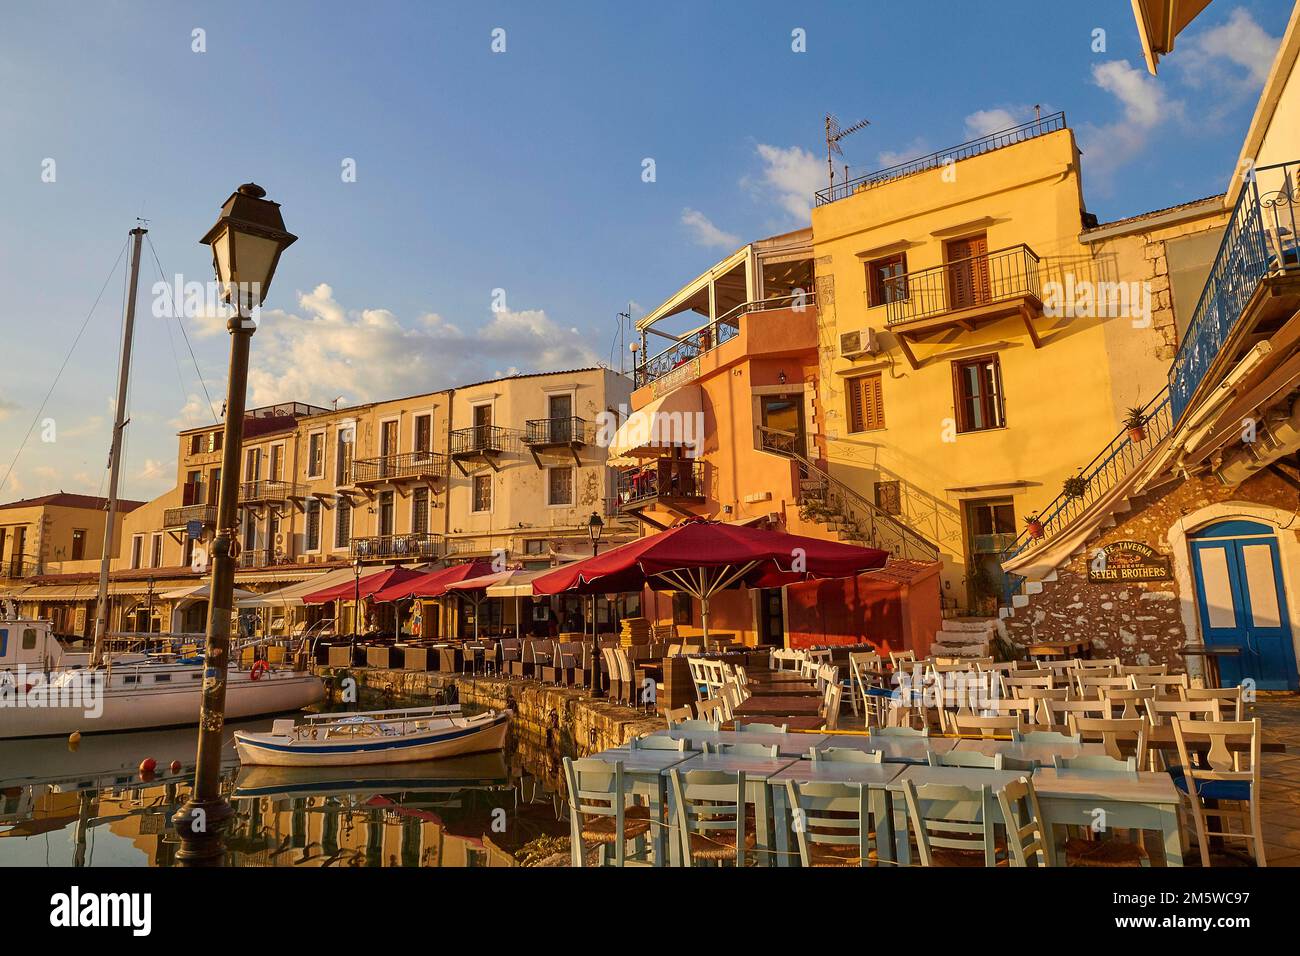 Morning light, sunrise, Venetian harbour, row of houses, colourful houses, taverns, tables, chairs, boats, blue sky, few grey-white clouds Stock Photo